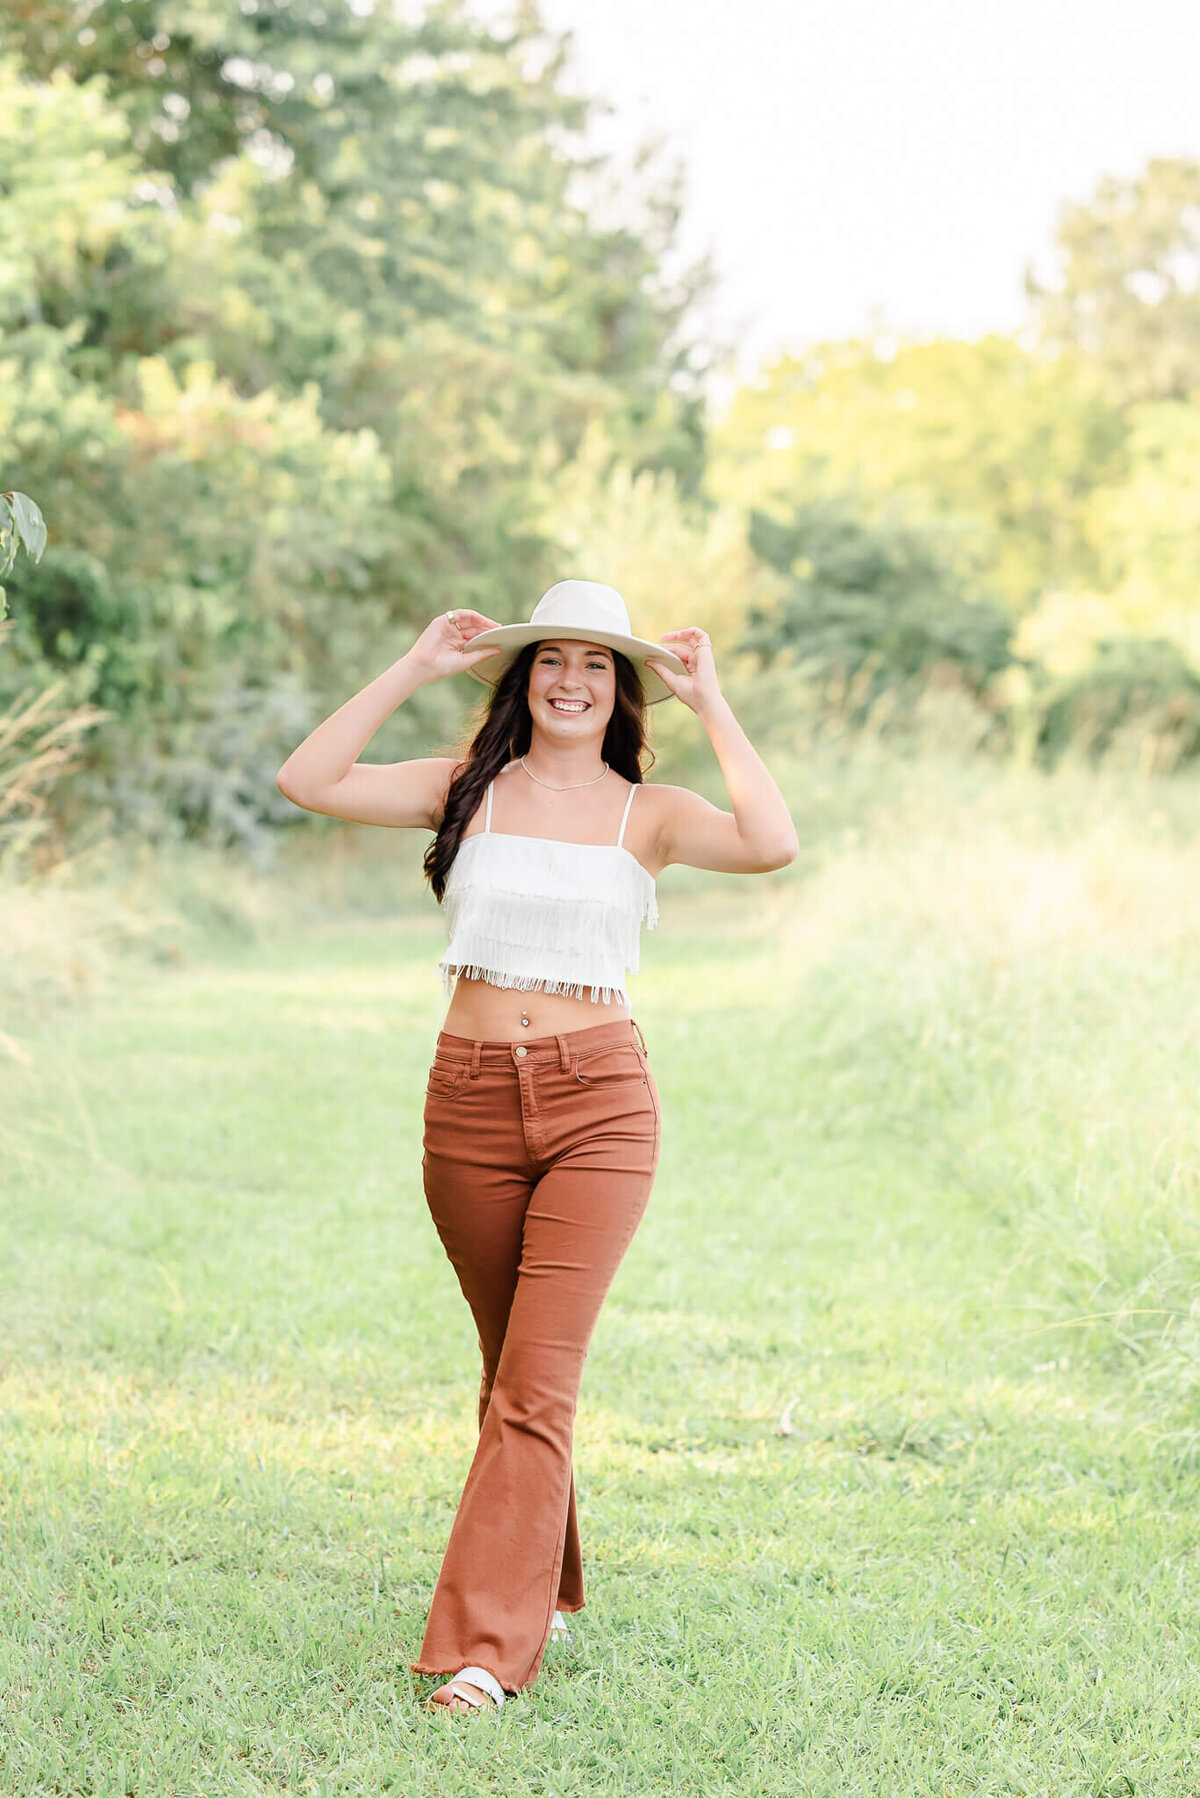 A high school senior, wearing orange pants and a white fringe top, holds her white hat and walks in a grassy field.